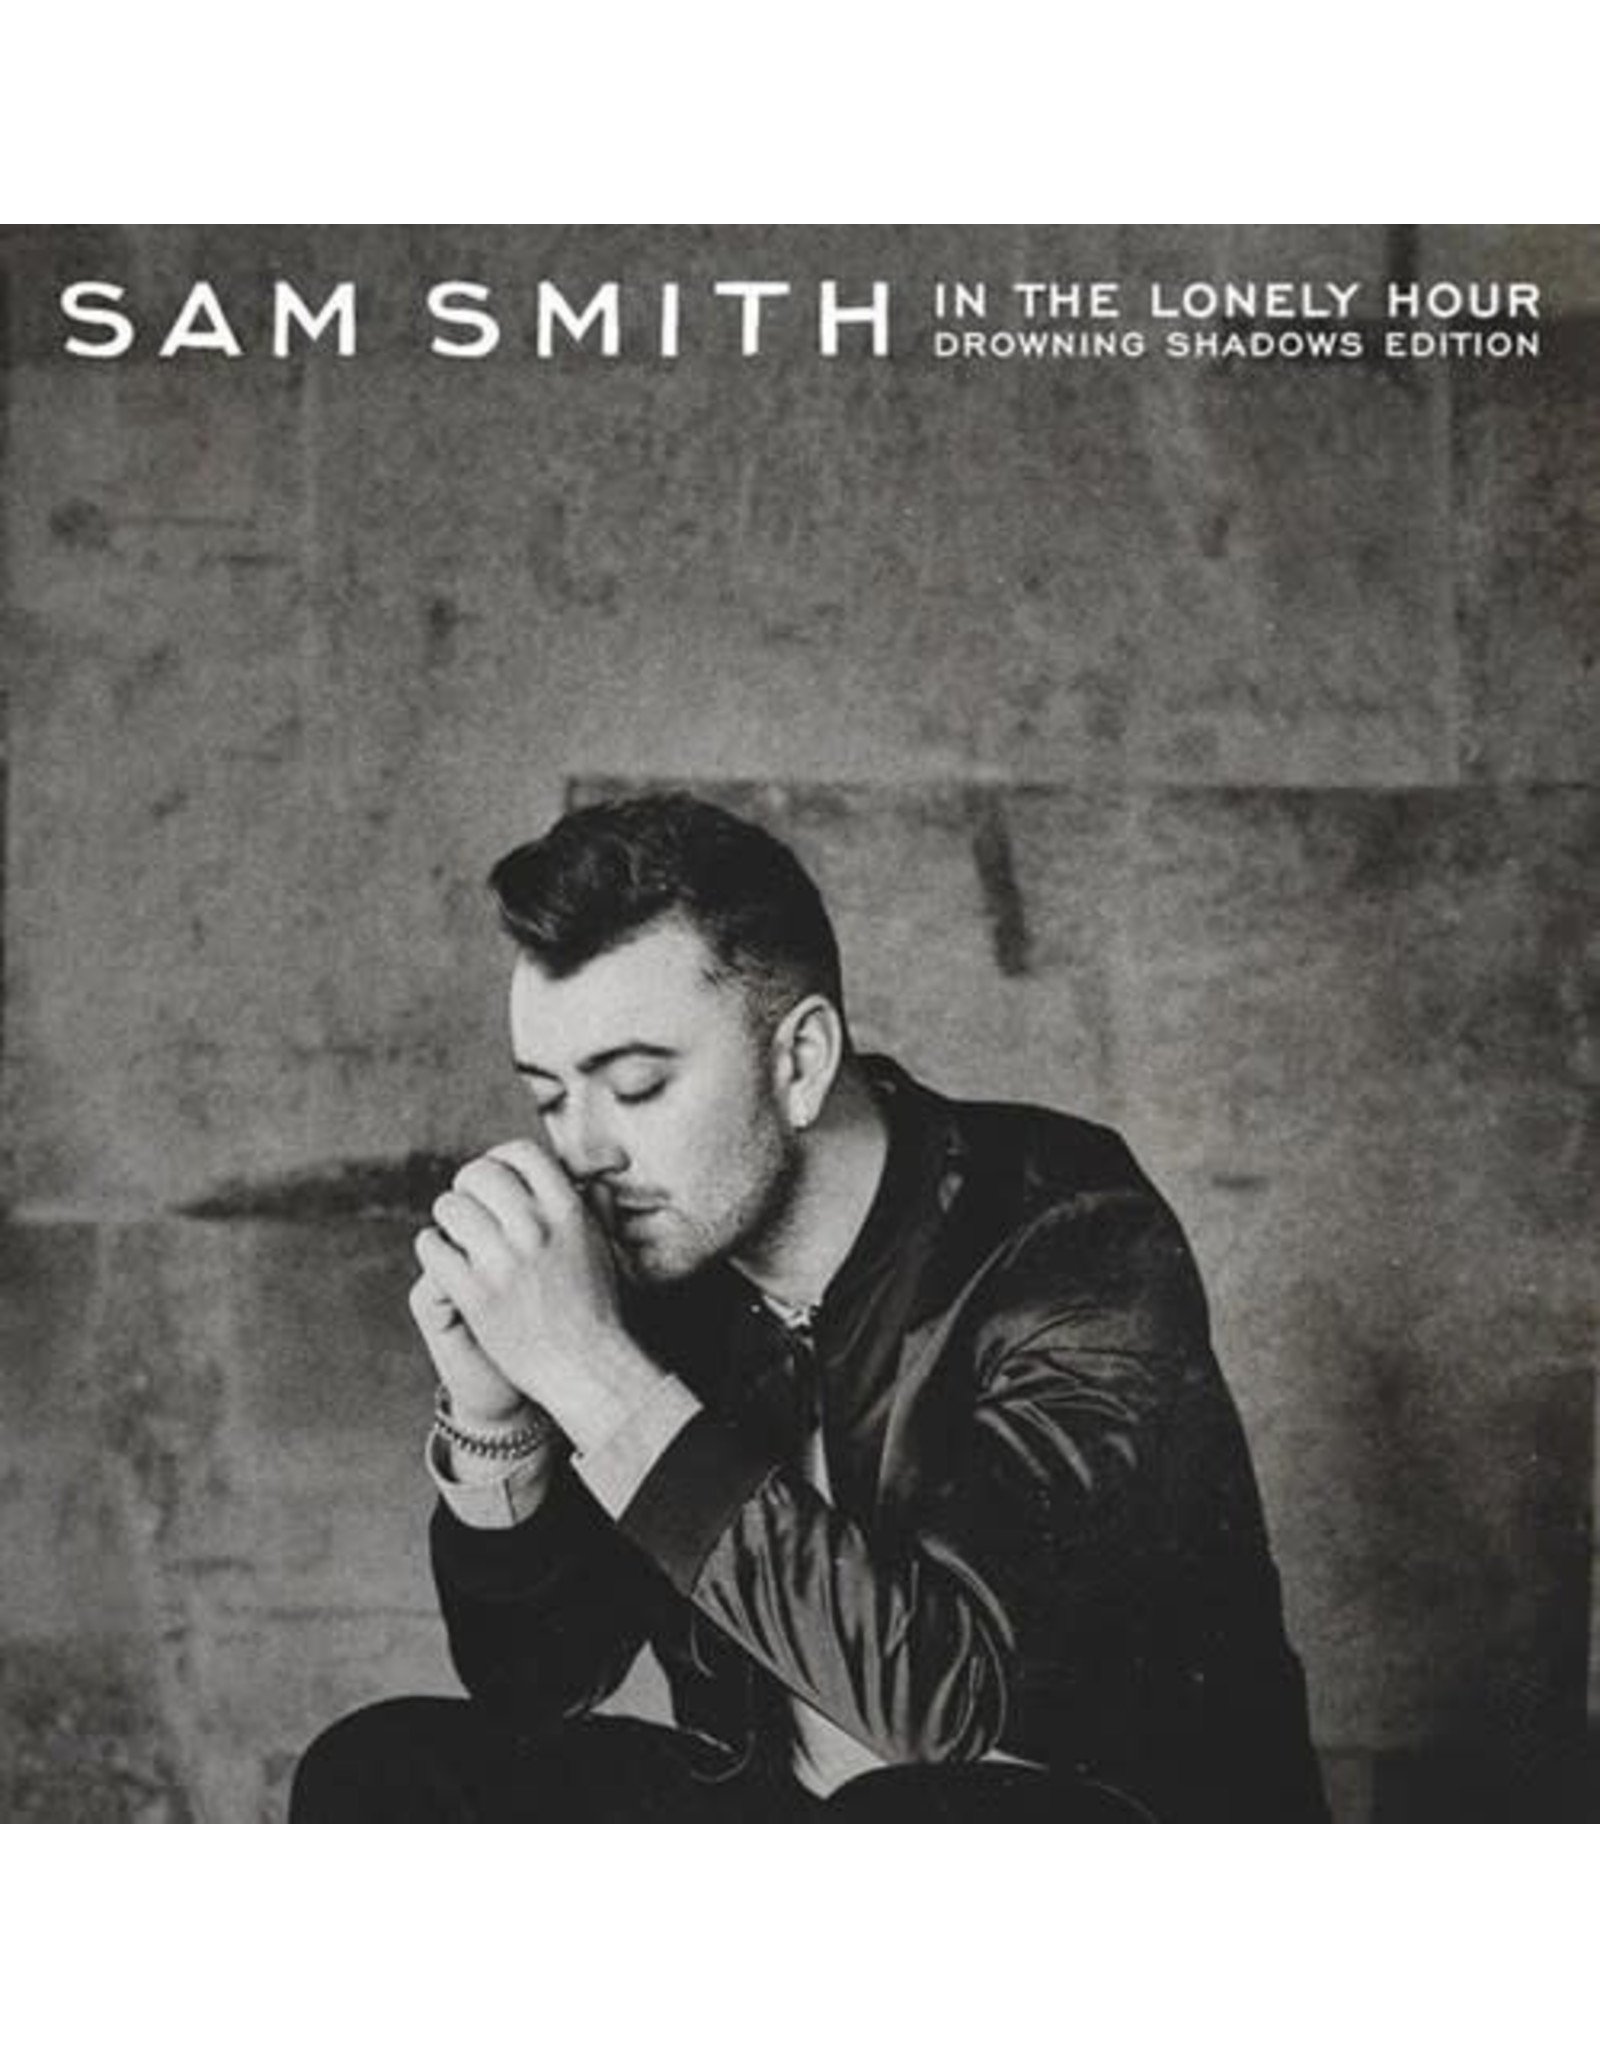 Sam smith in the lonely hour vinyl